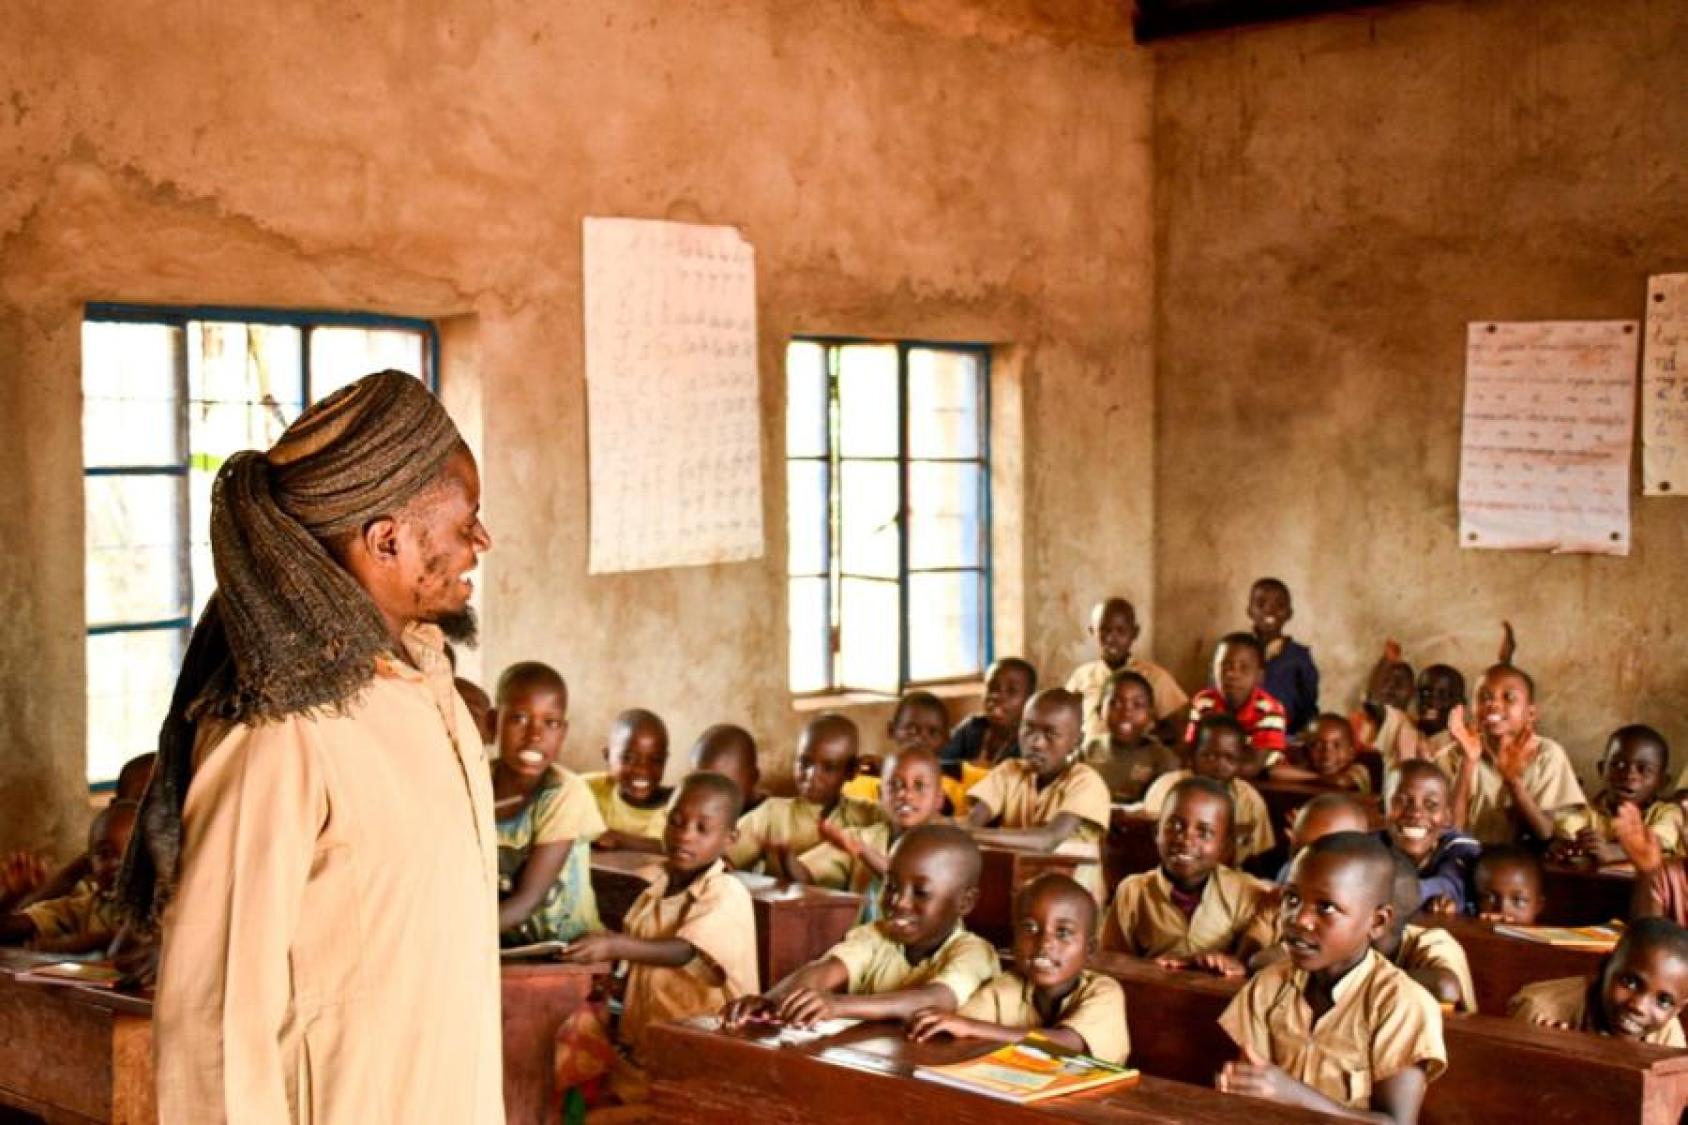 A man wearing a turban teaches a class to young boys at a school in Burundi